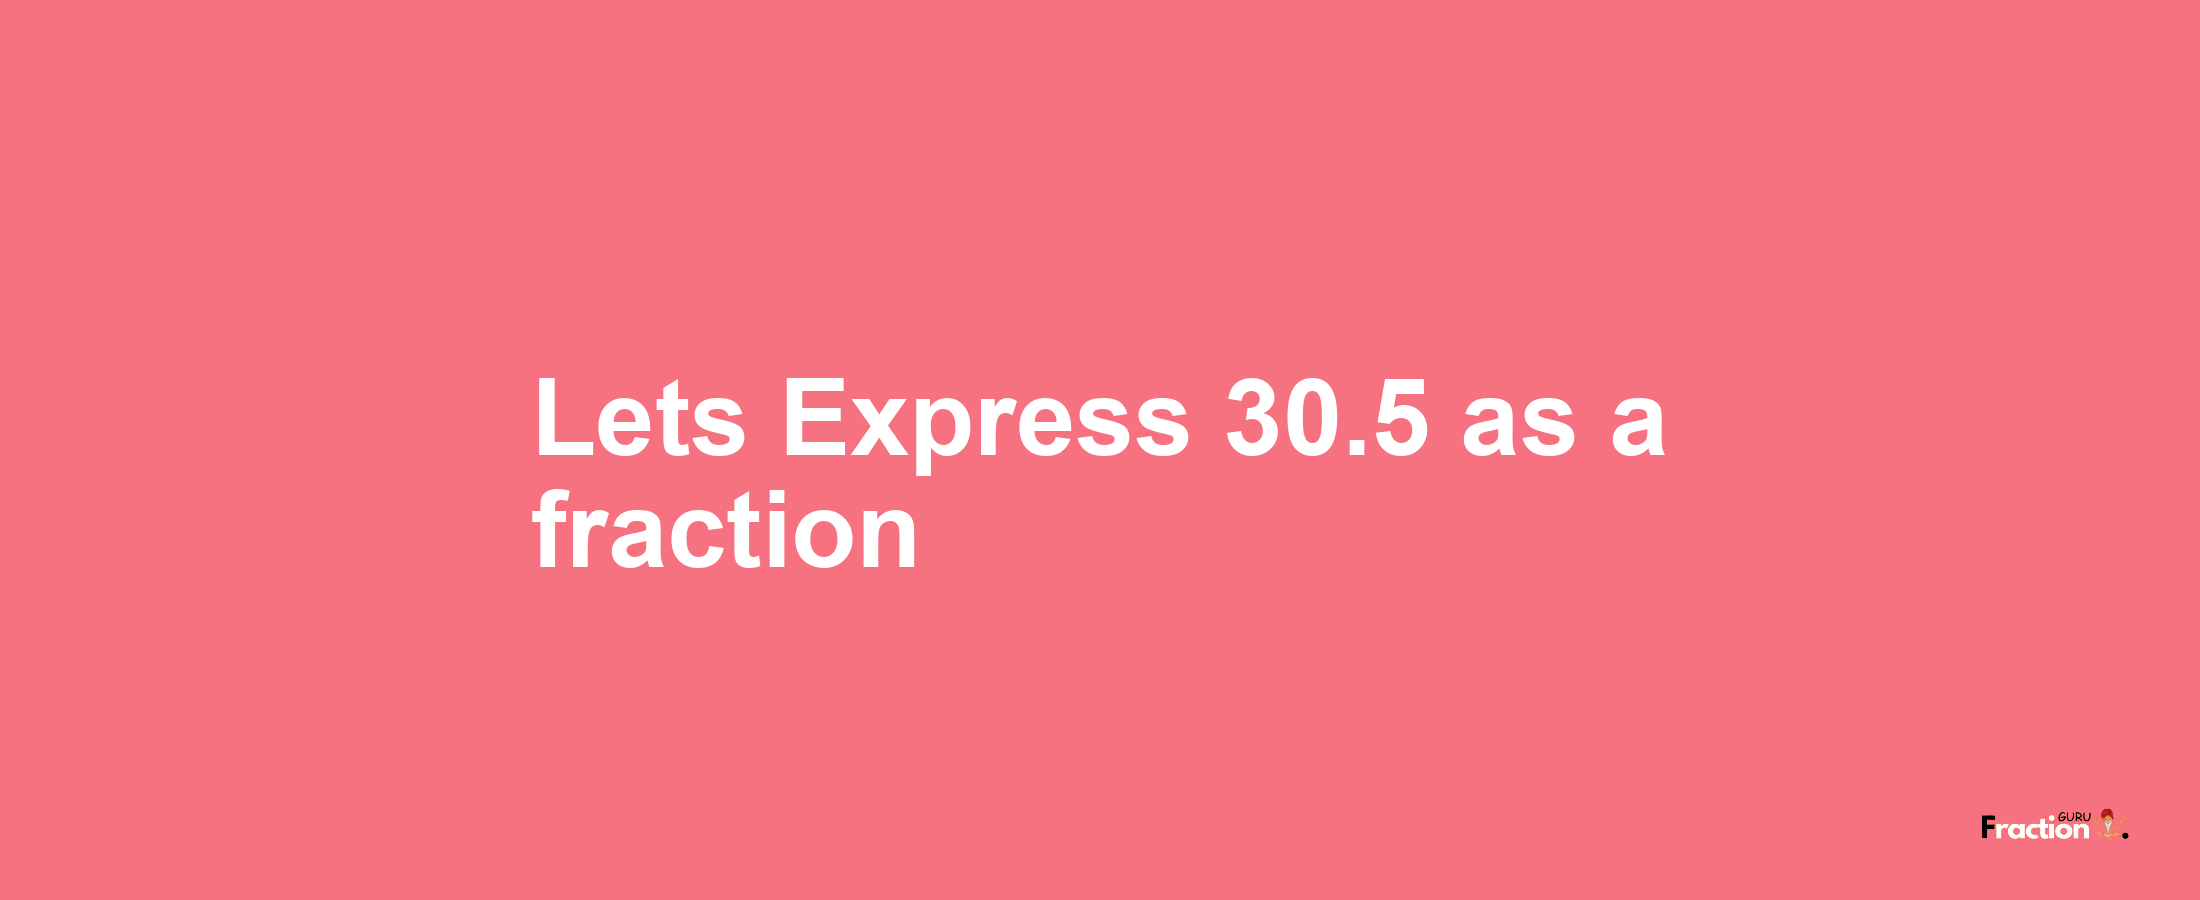 Lets Express 30.5 as afraction